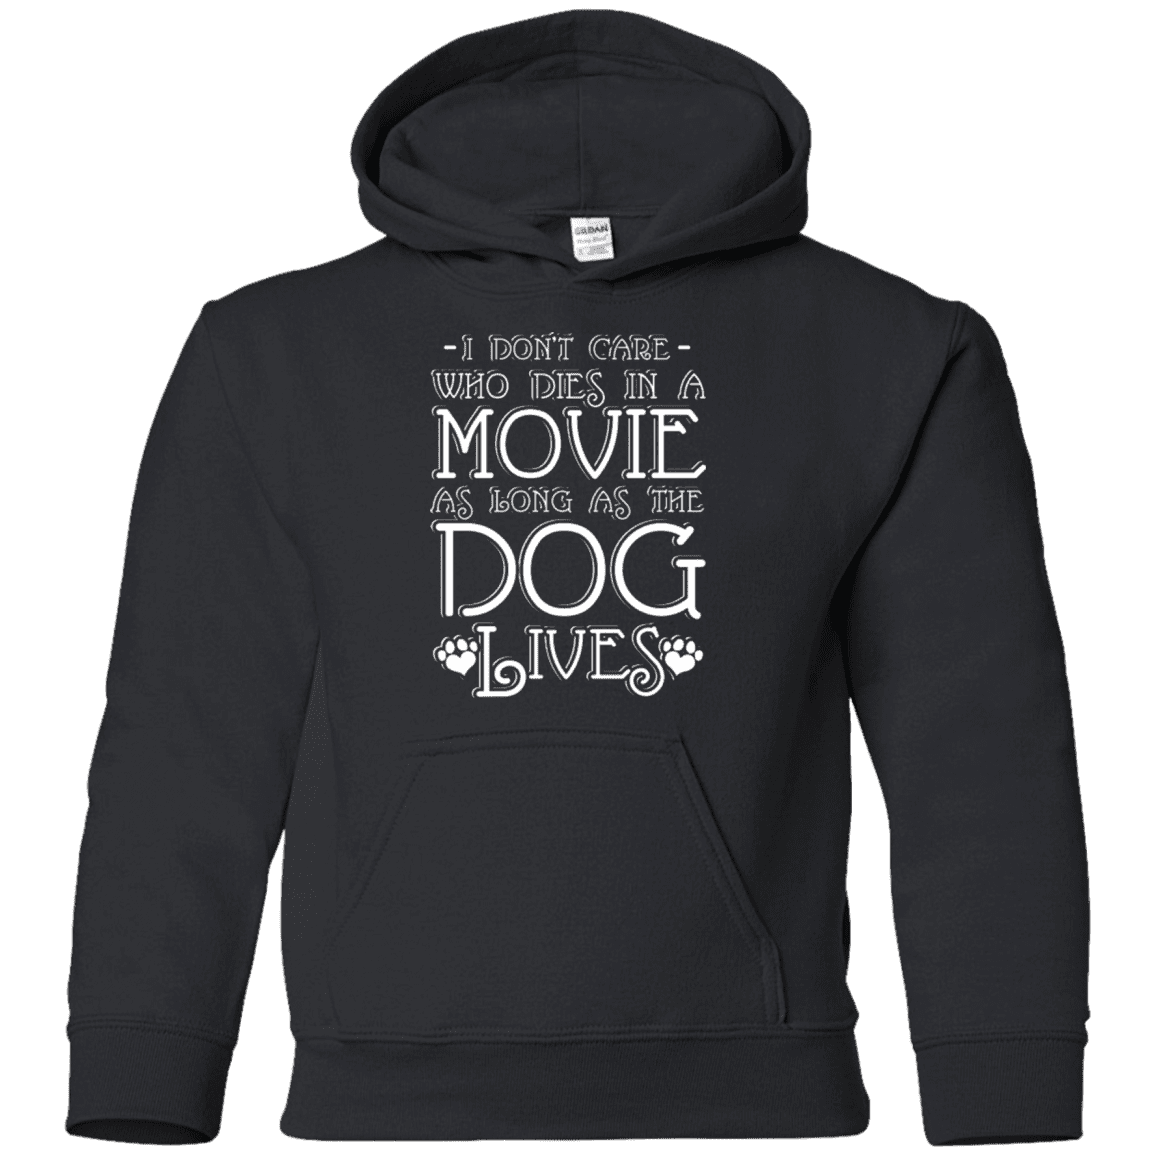 I Don't Care Who Dies In A Movie - Youth Hoodie.